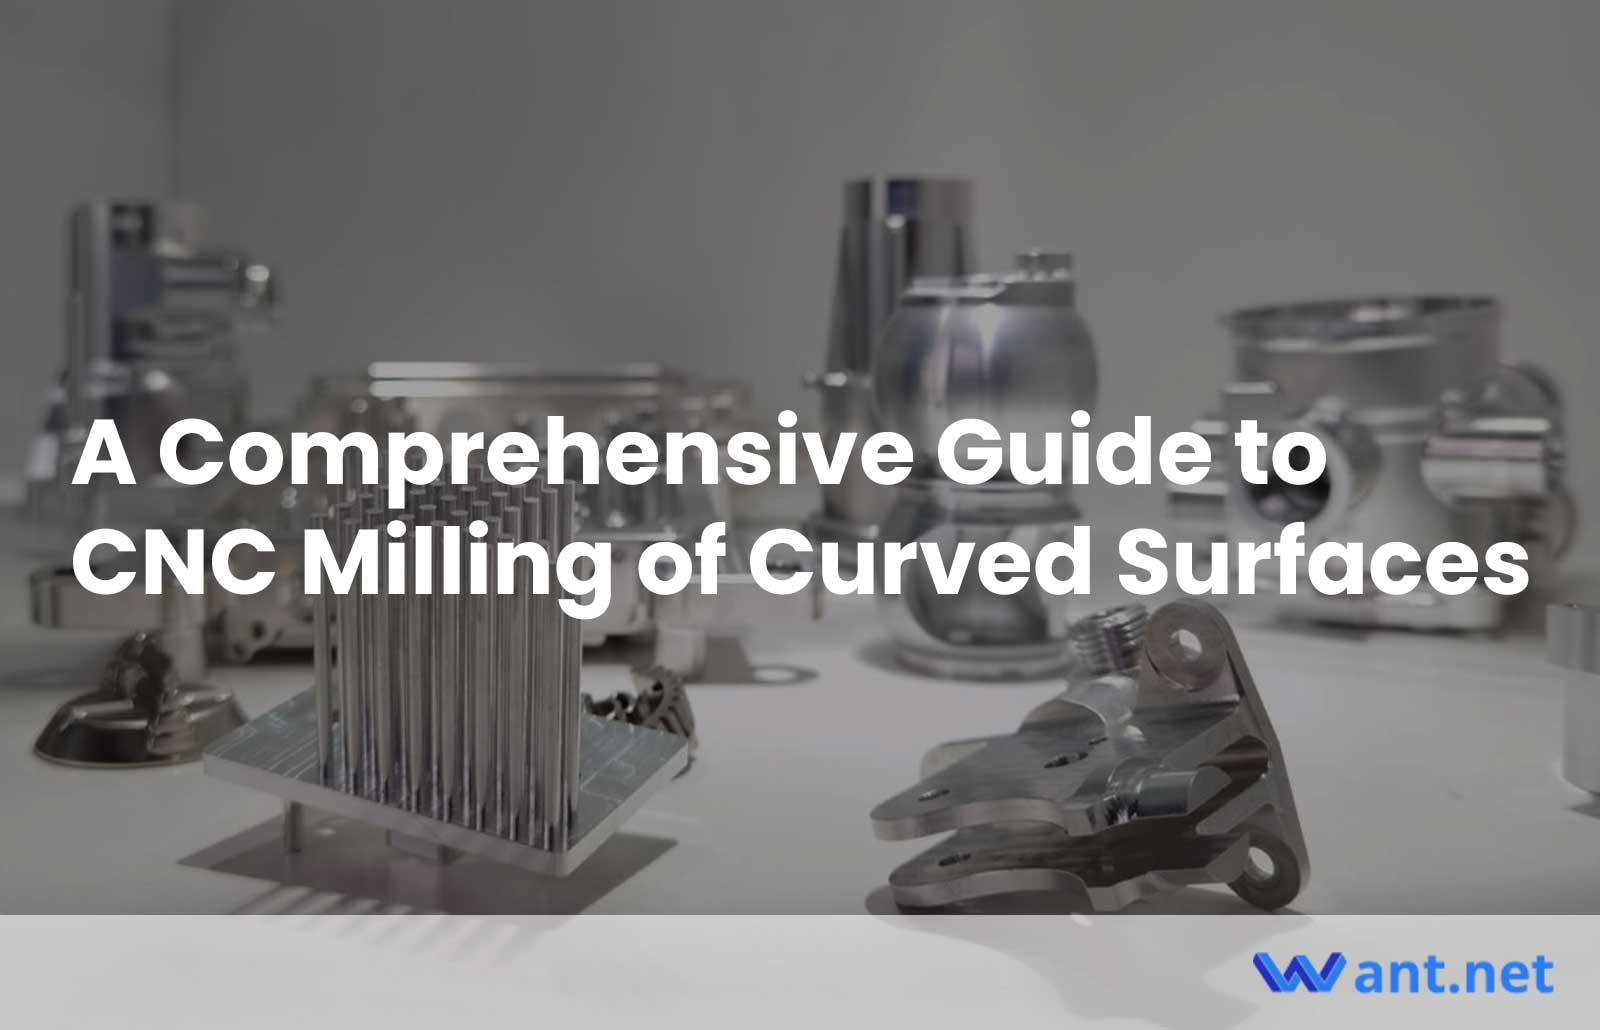 A Comprehensive Guide to CNC Milling of Curved Surfaces